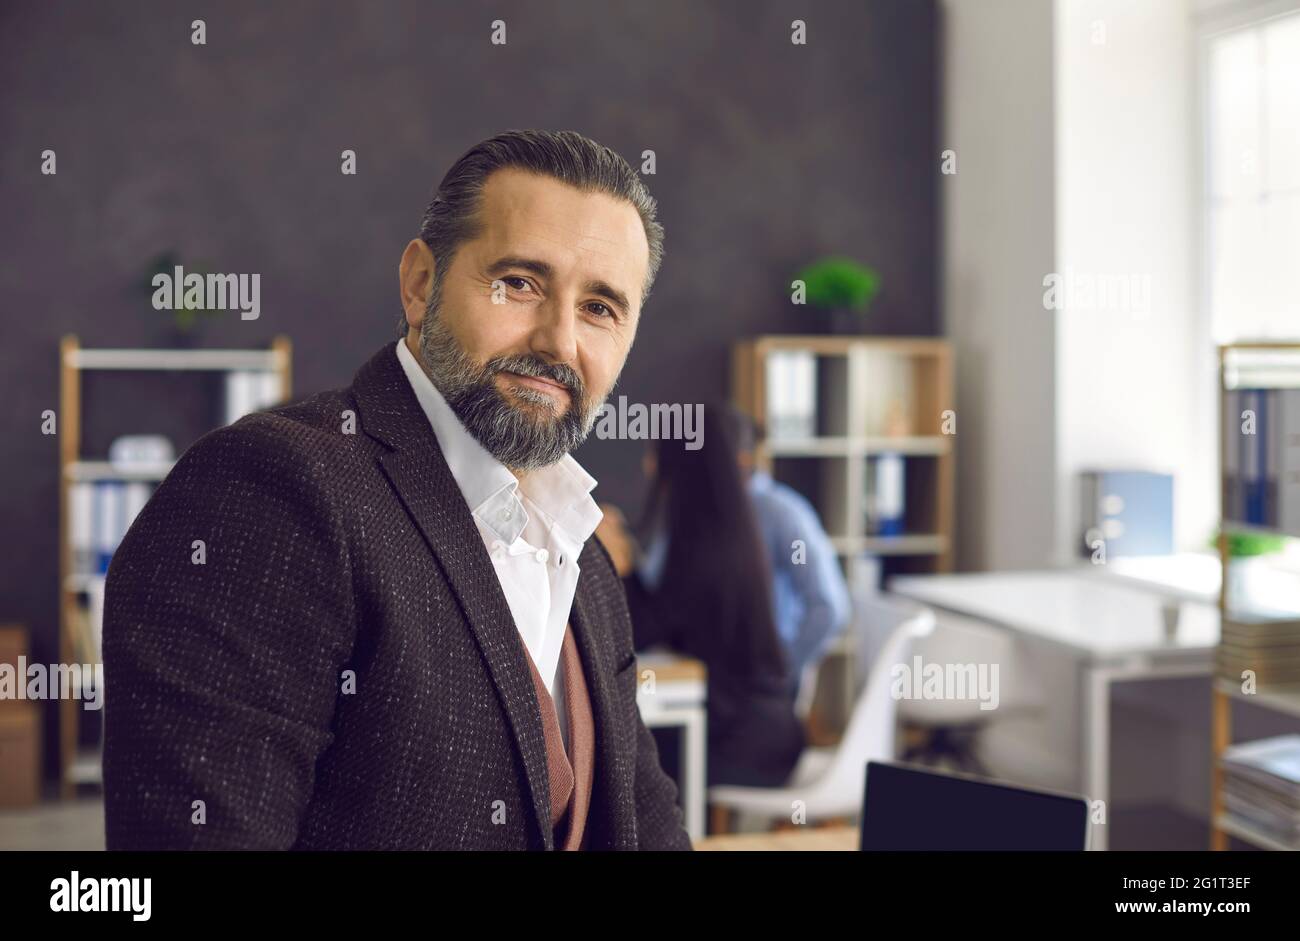 Portrait of a handsome senior business executive against a blurred office background Stock Photo